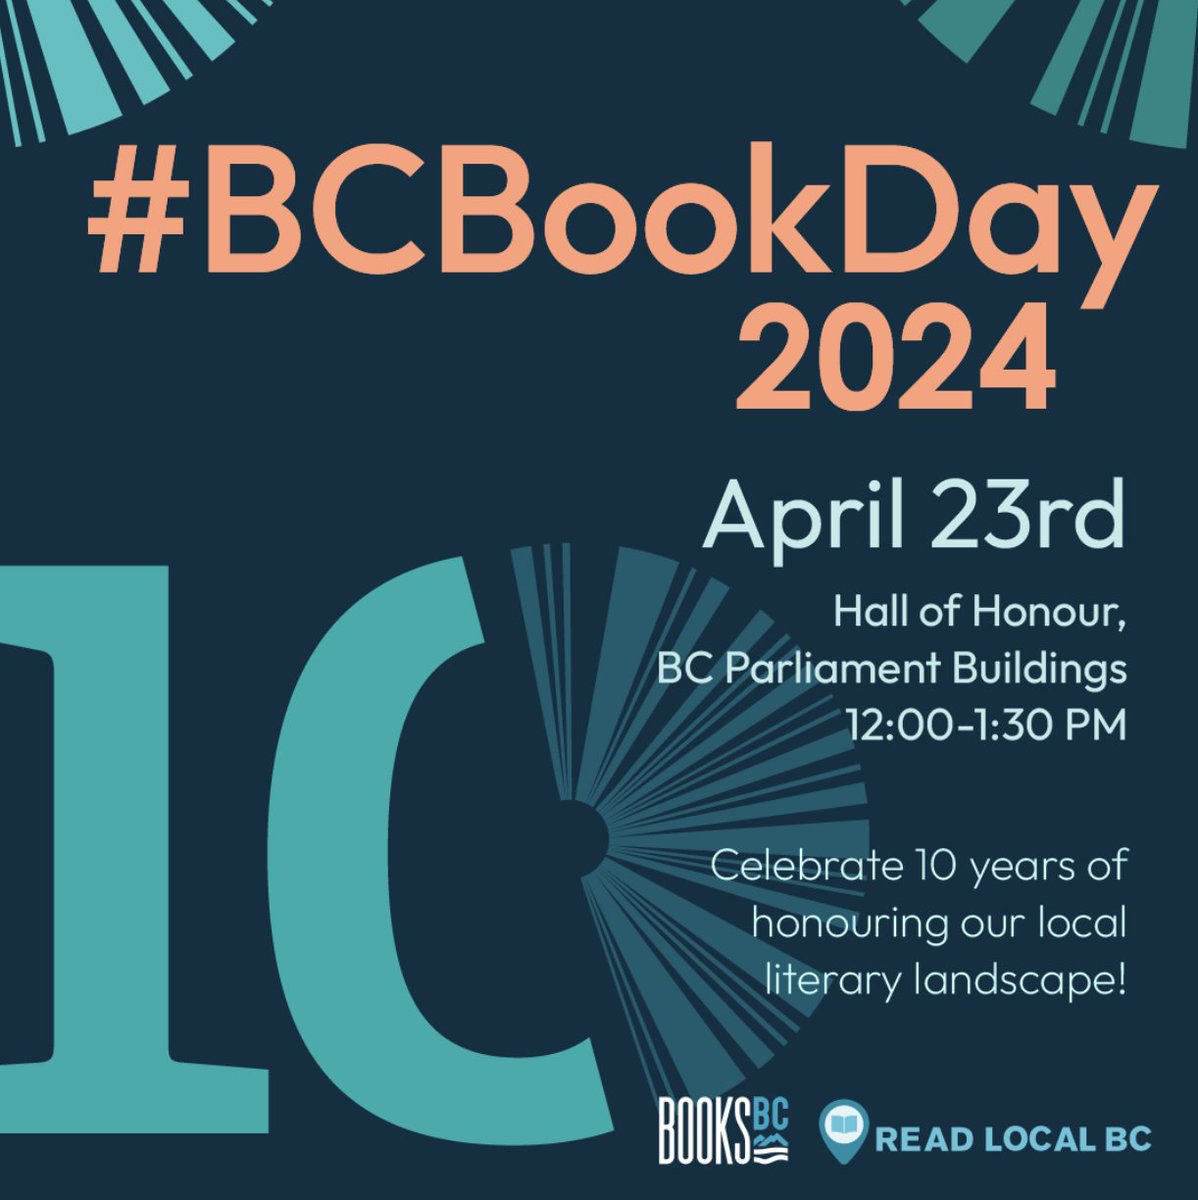 Today is #BCBookDay, celebrating our province’s book & magazine publishers, authors, illustrators, bookstores, libraries, festivals, and literary prizes that connect us with local stories. Support #BCBooks & #ReadLocalBC! Learn more: creativebc.com/calendar/bc-bo… #ReadBC @ReadLocalBC